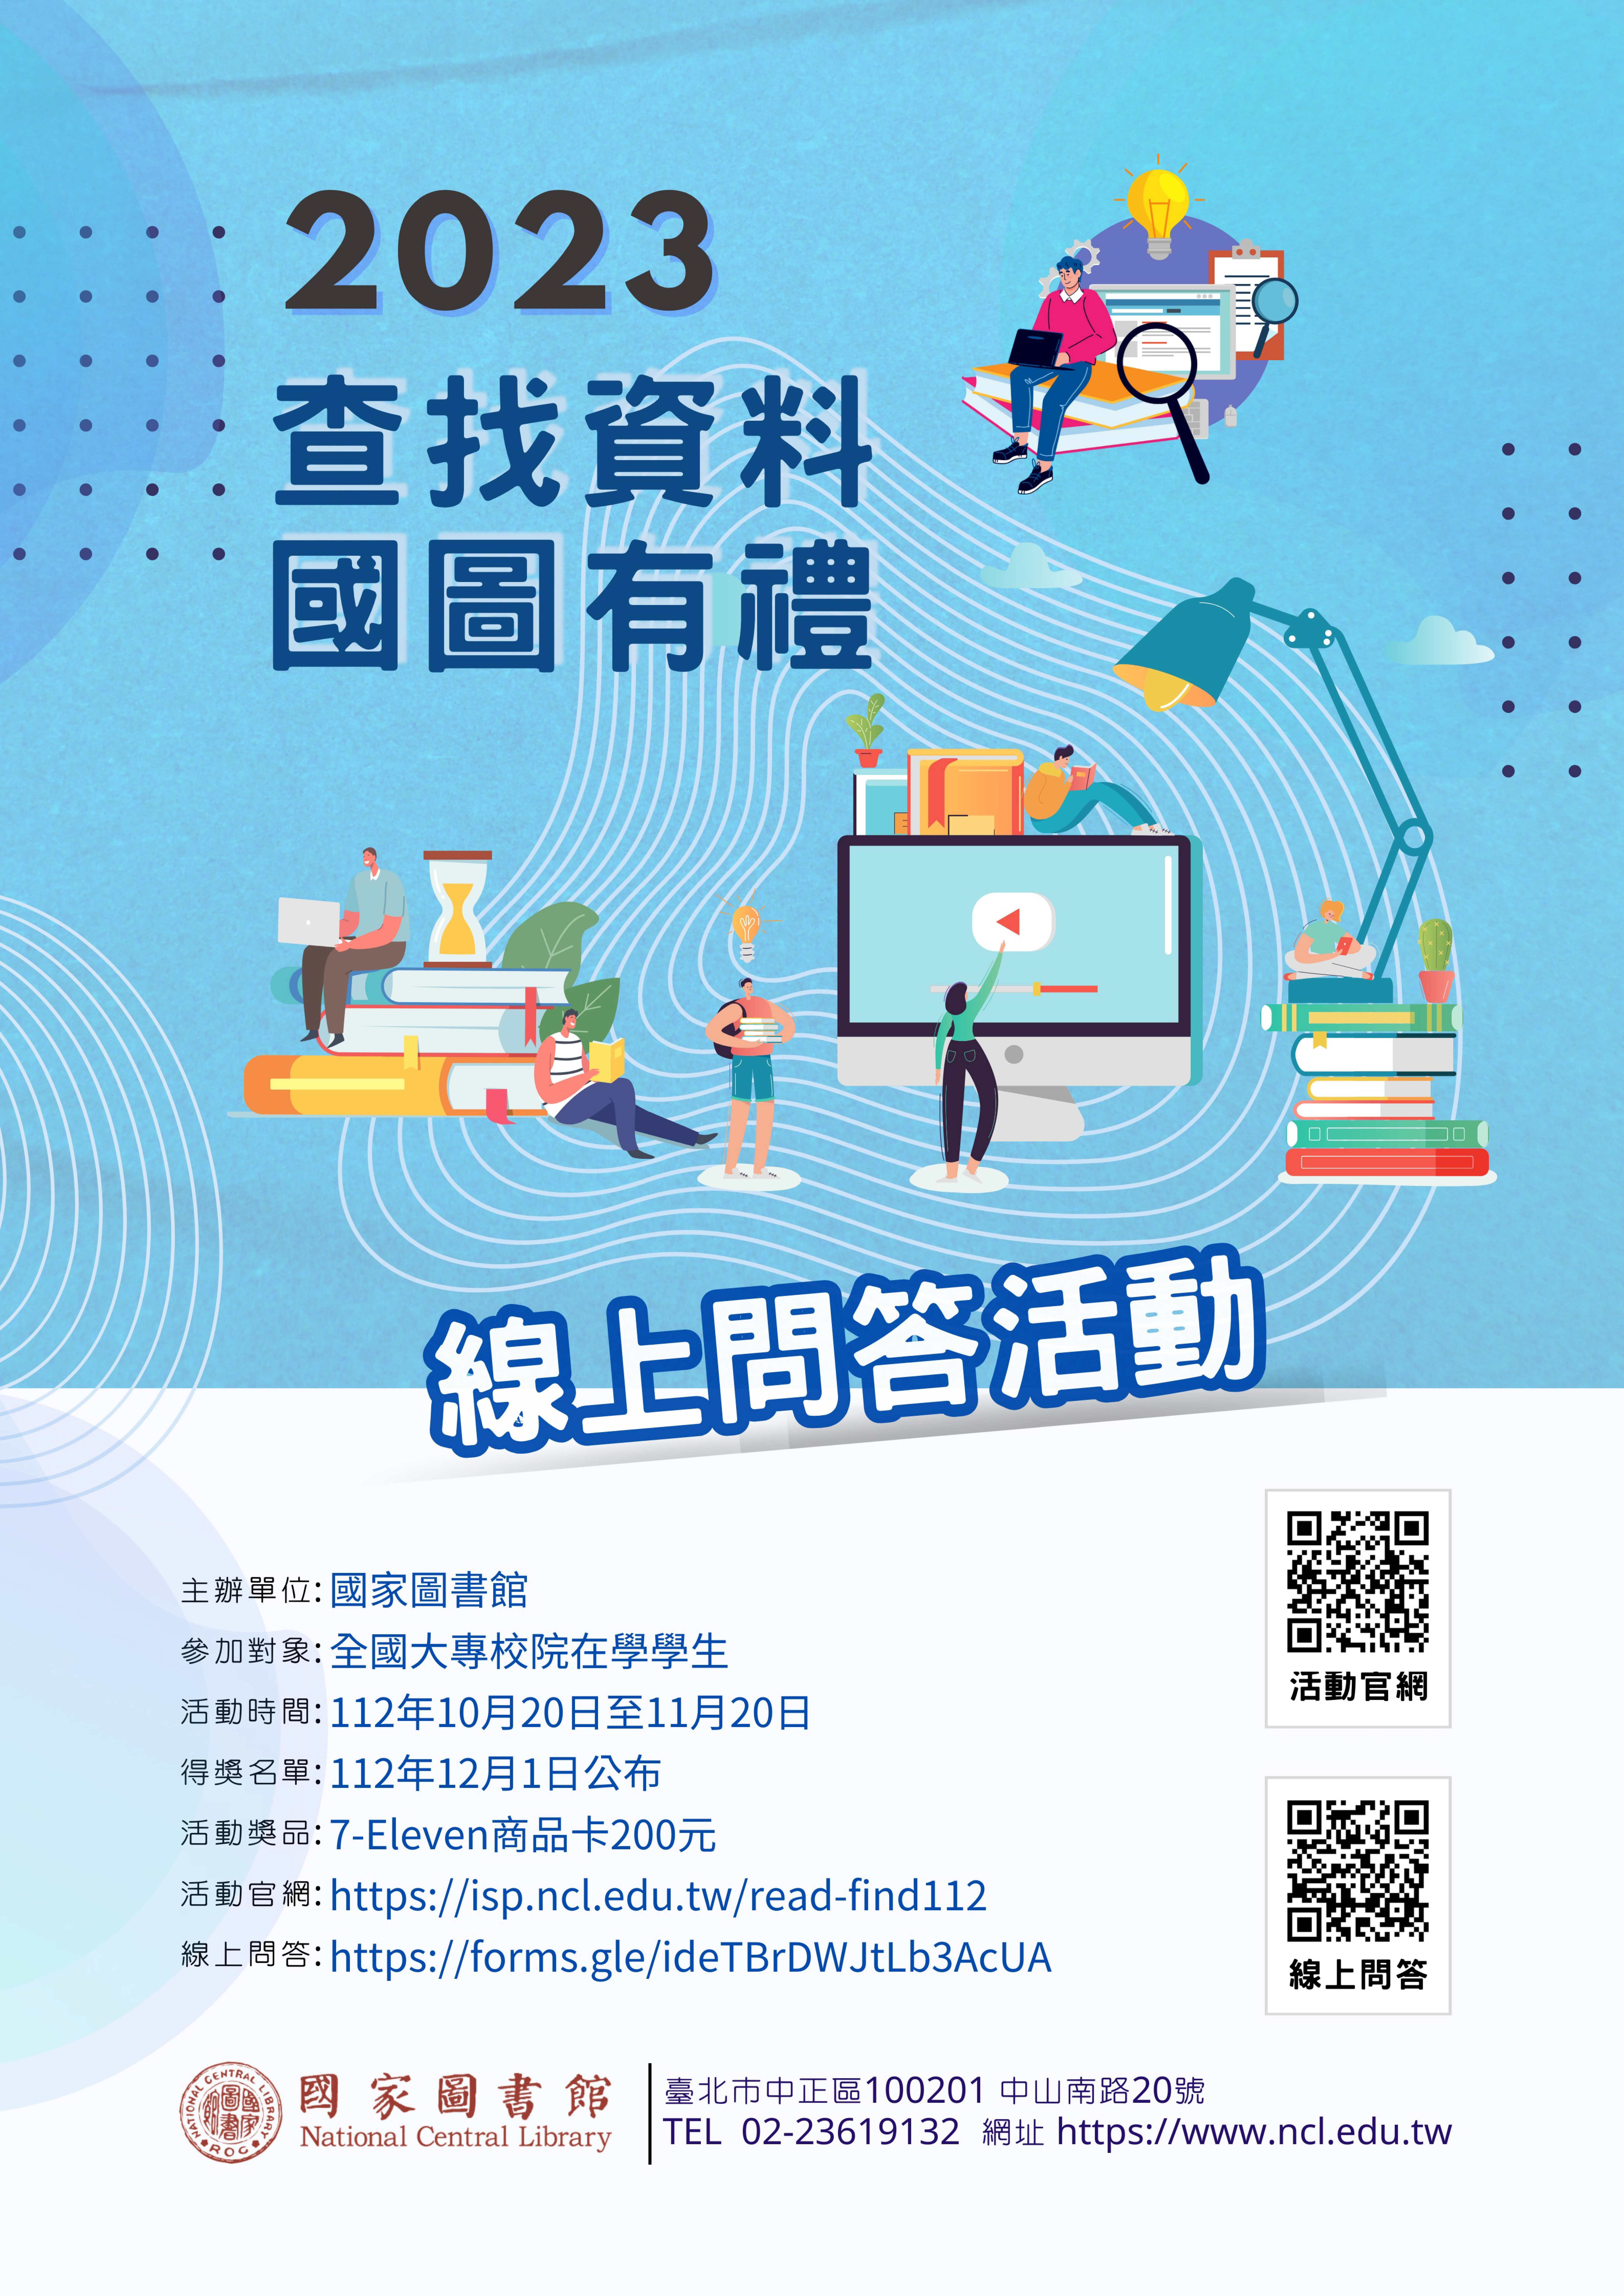 【Activity】National Central Library 2023 Online Rewarded Questions